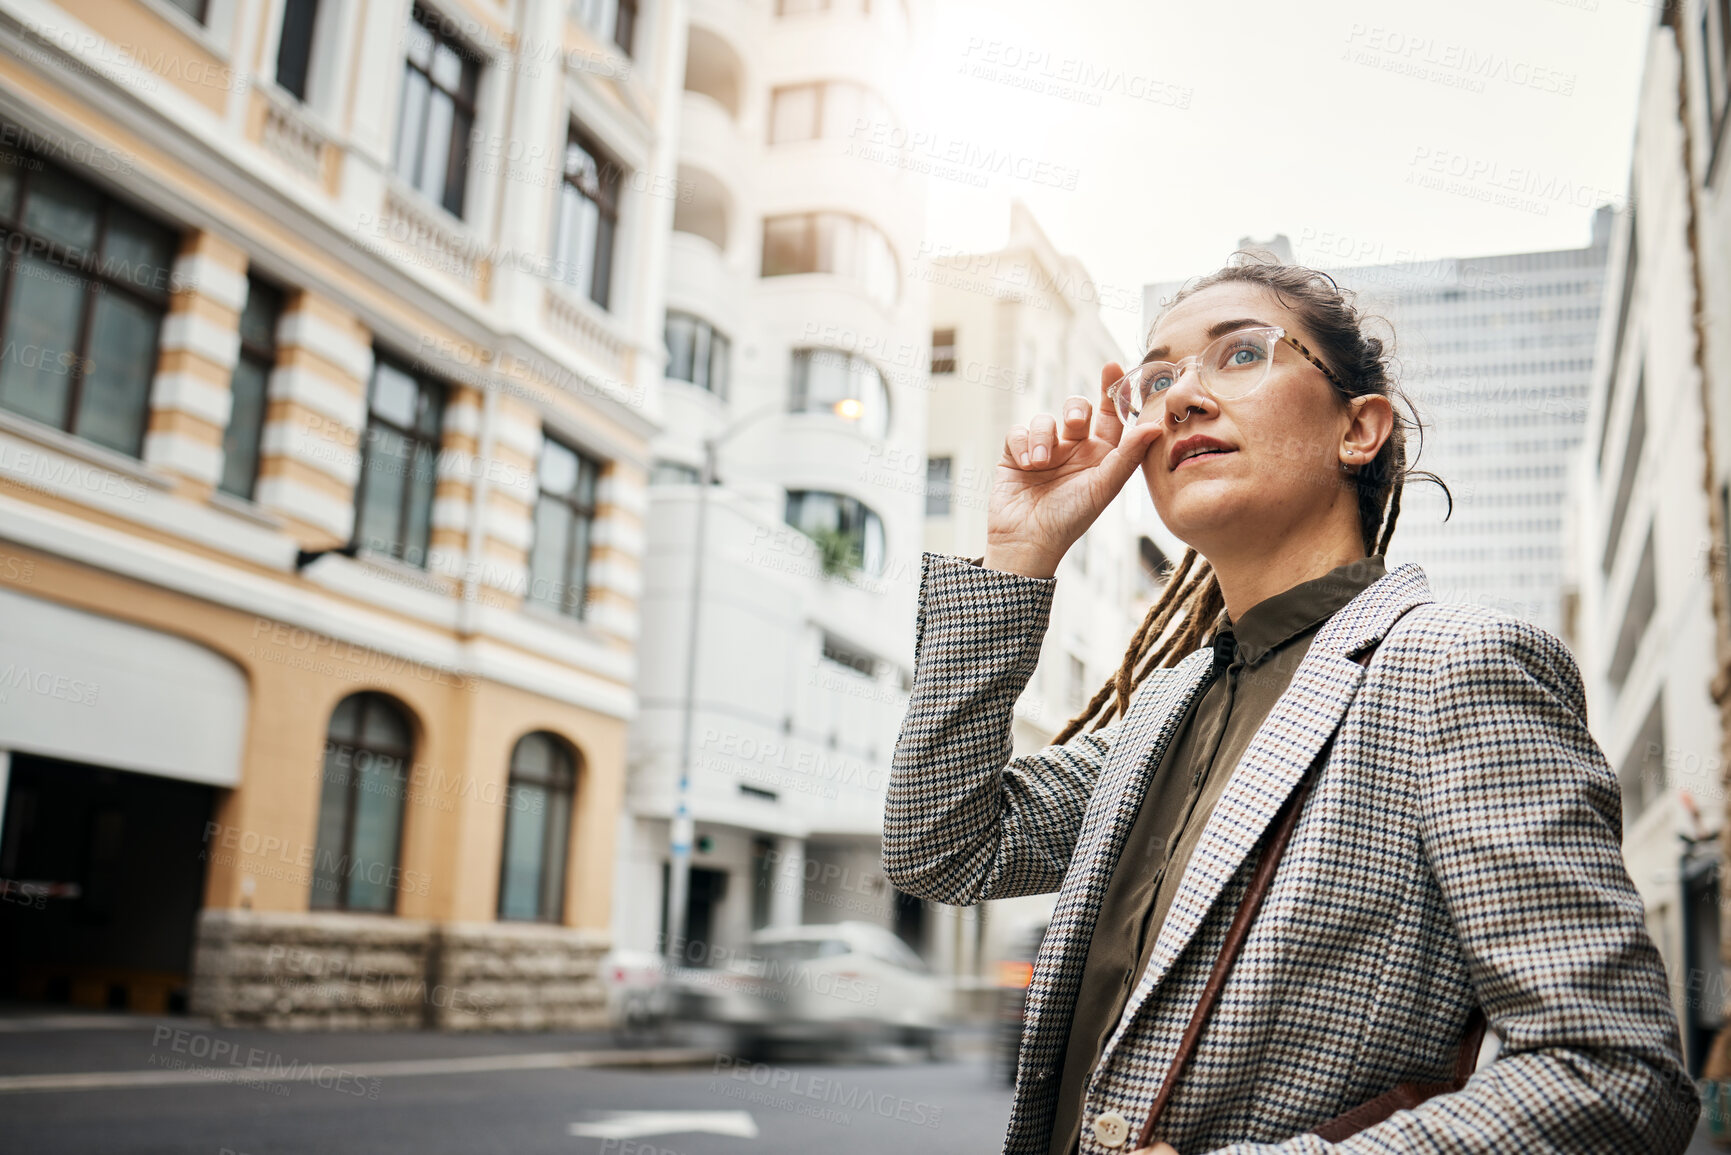 Buy stock photo Corporate woman in city, travel and commute to work with buildings, motion blur and waiting for taxi cab. Professional female person in urban street, business clothes and journey to workplace